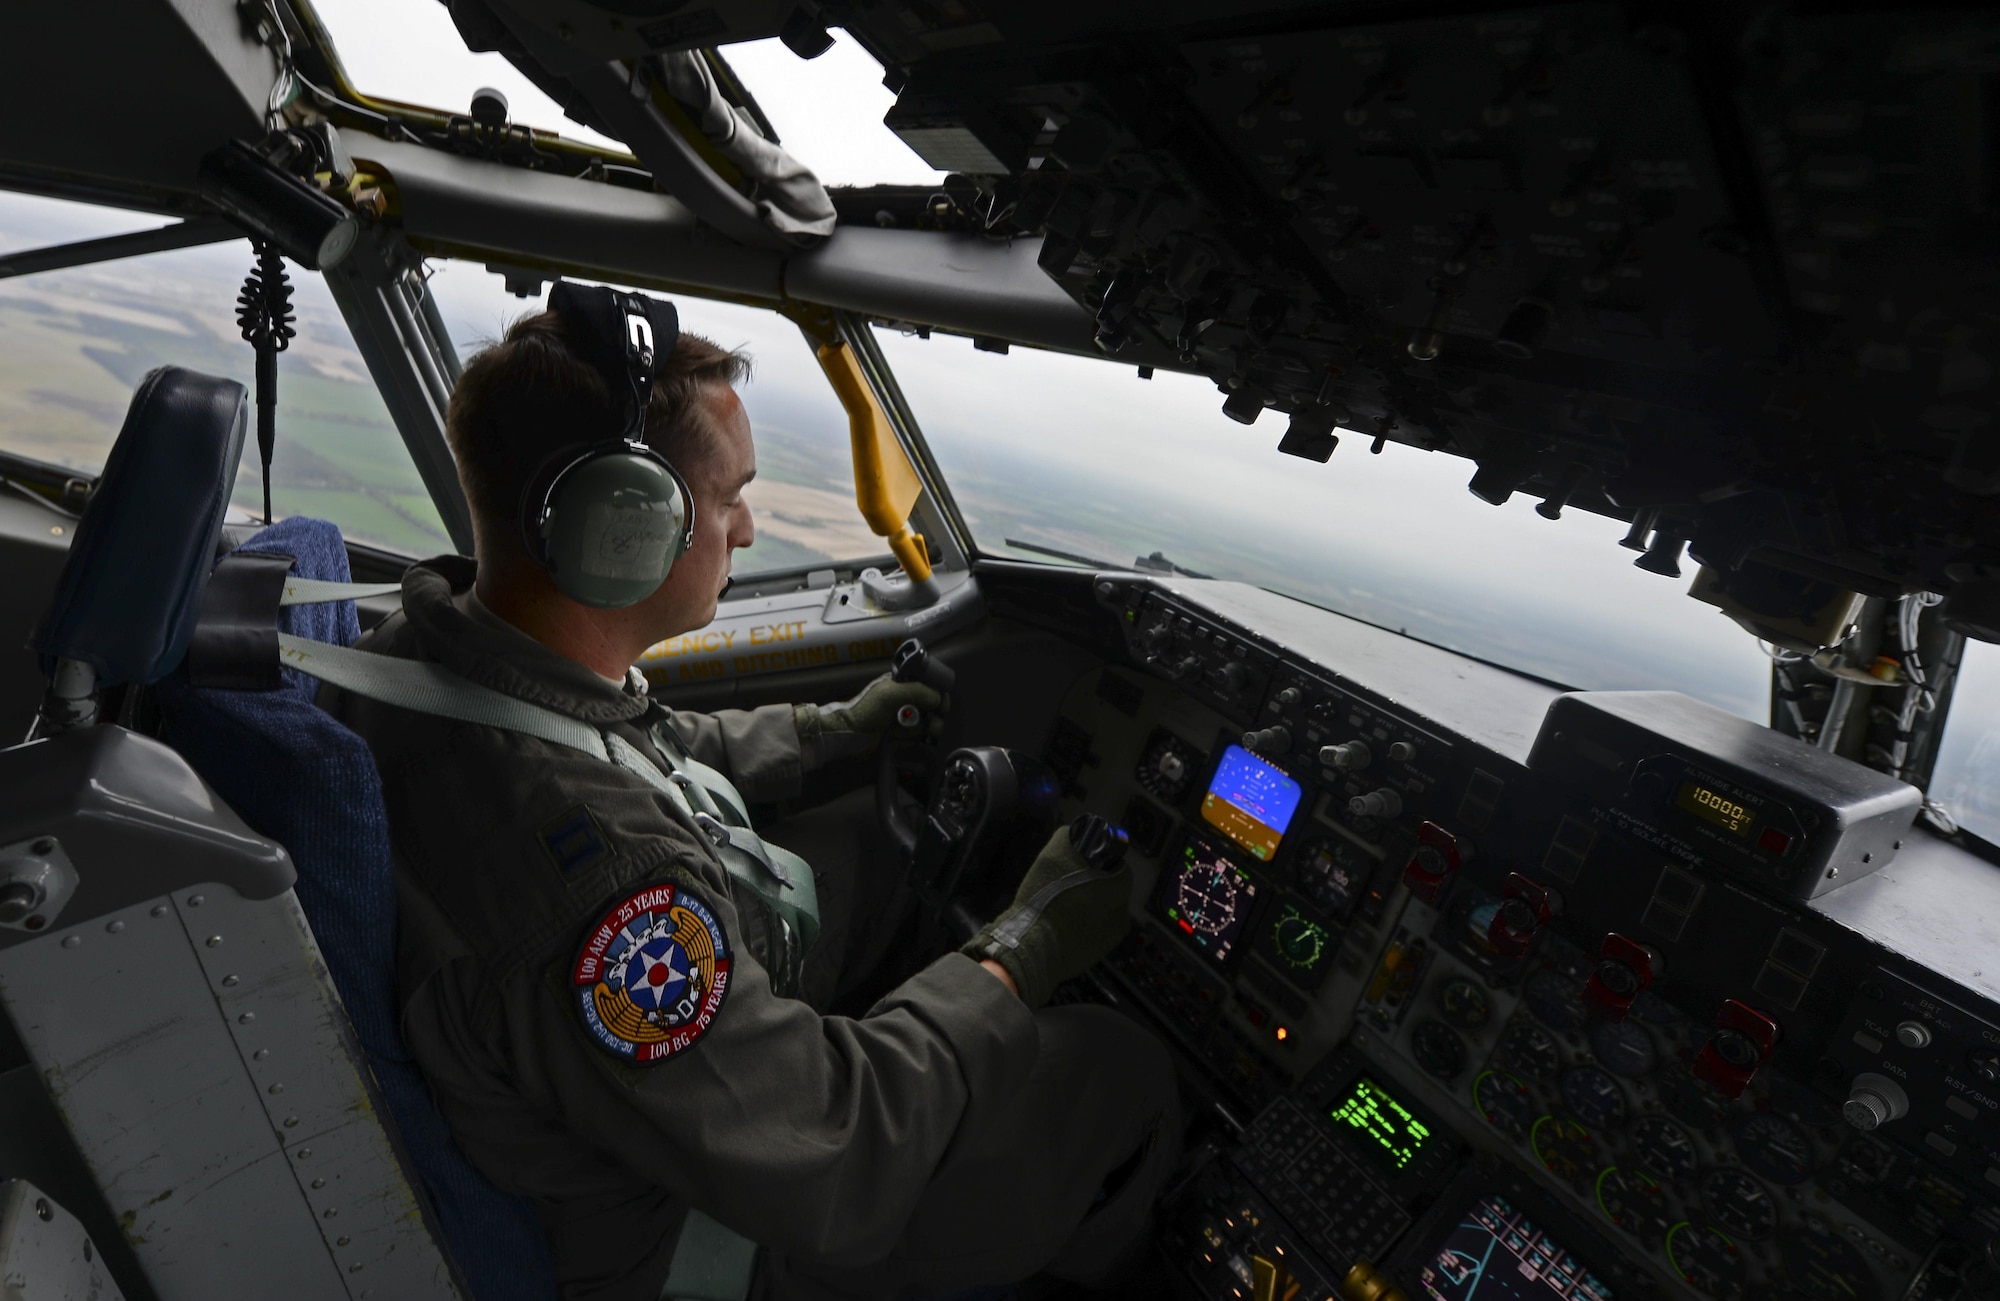 U.S. Air Force Capt. Bobby Stanford, 351st Air Refueling Squadron mission commander, flies a KC-135 Stratotanker May 3, 2017, over RAF Mildenhall, England. As the mission commander Stanford was in charge of two other aircraft during the refueling mission. (U.S. Air Force photo by Staff Sgt. Micaiah Anthony)